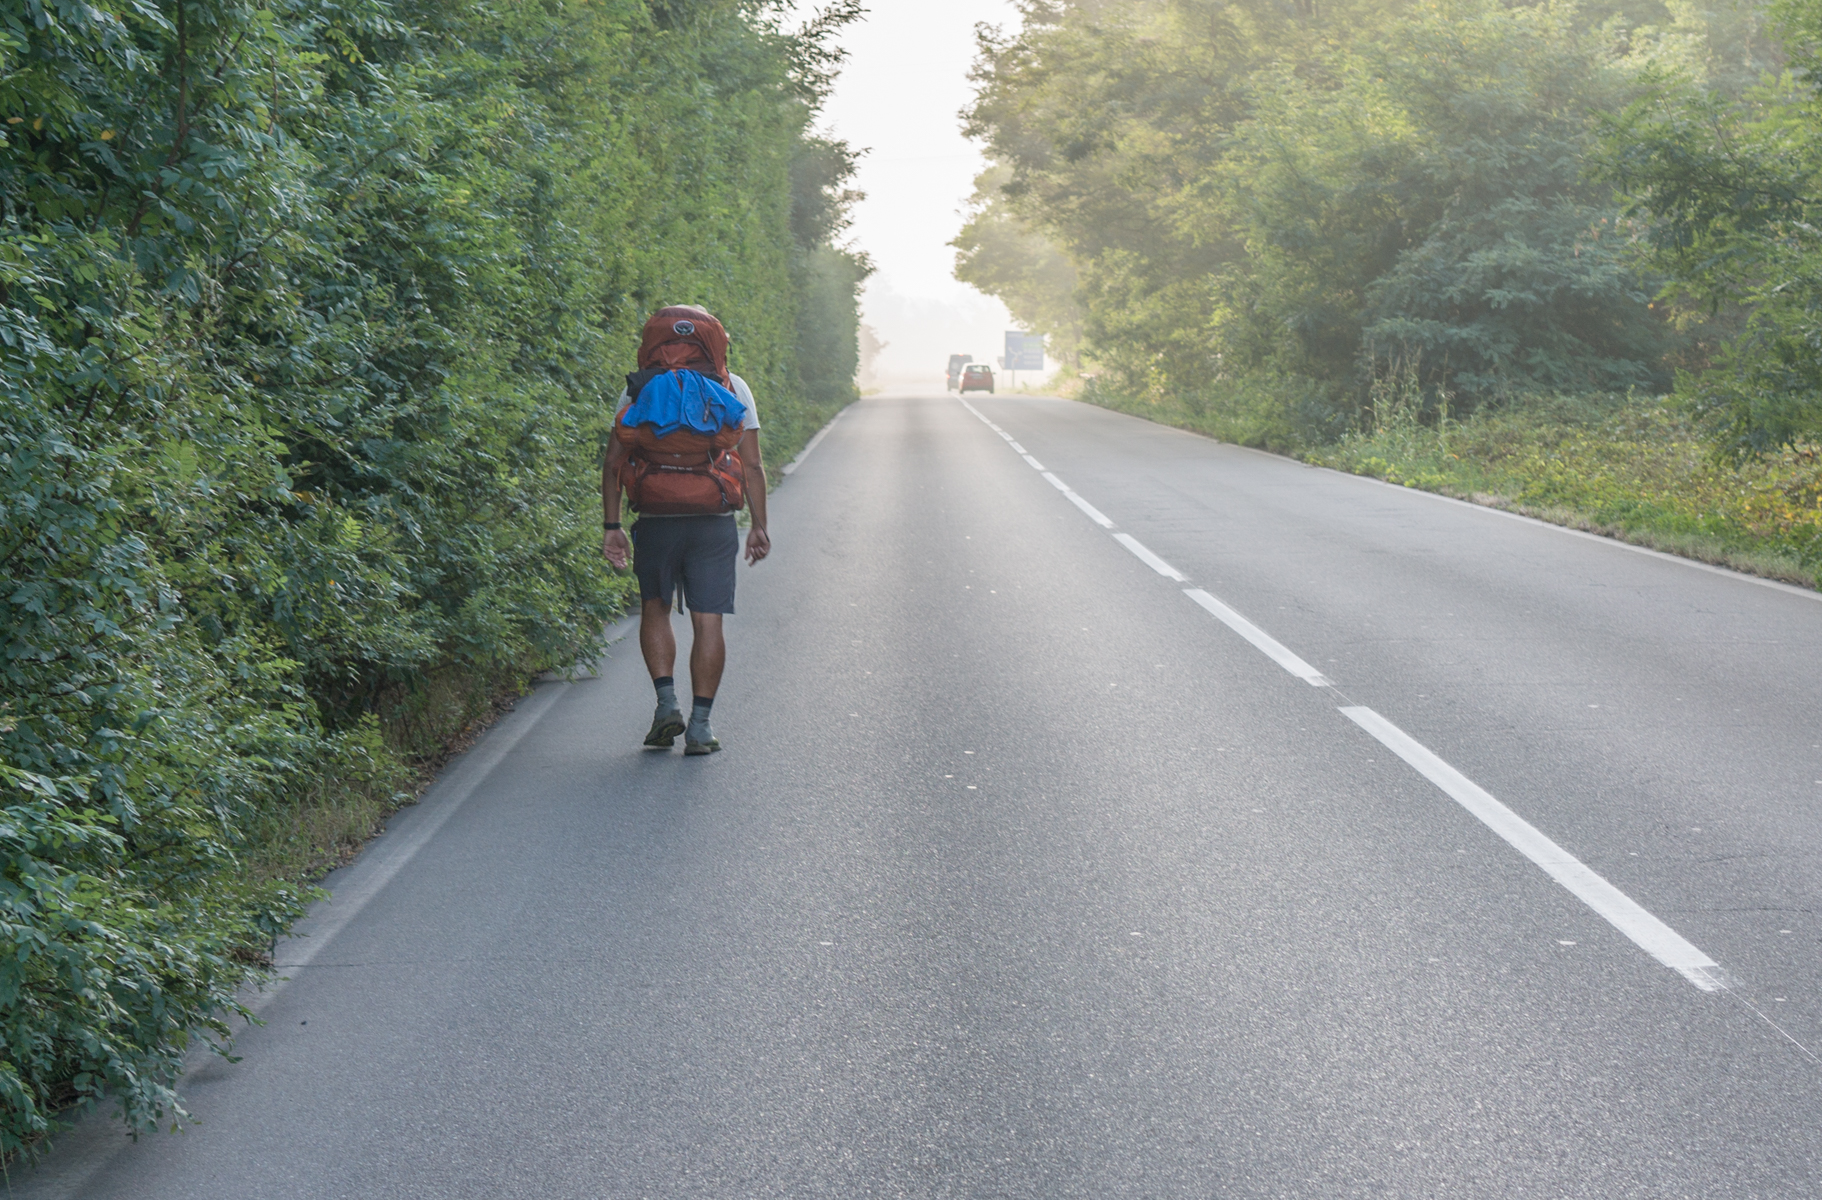 A pilgrim on the Via Francigena shortly after departing Gropello Cairoli, Italy | Photo by Mike Hudak